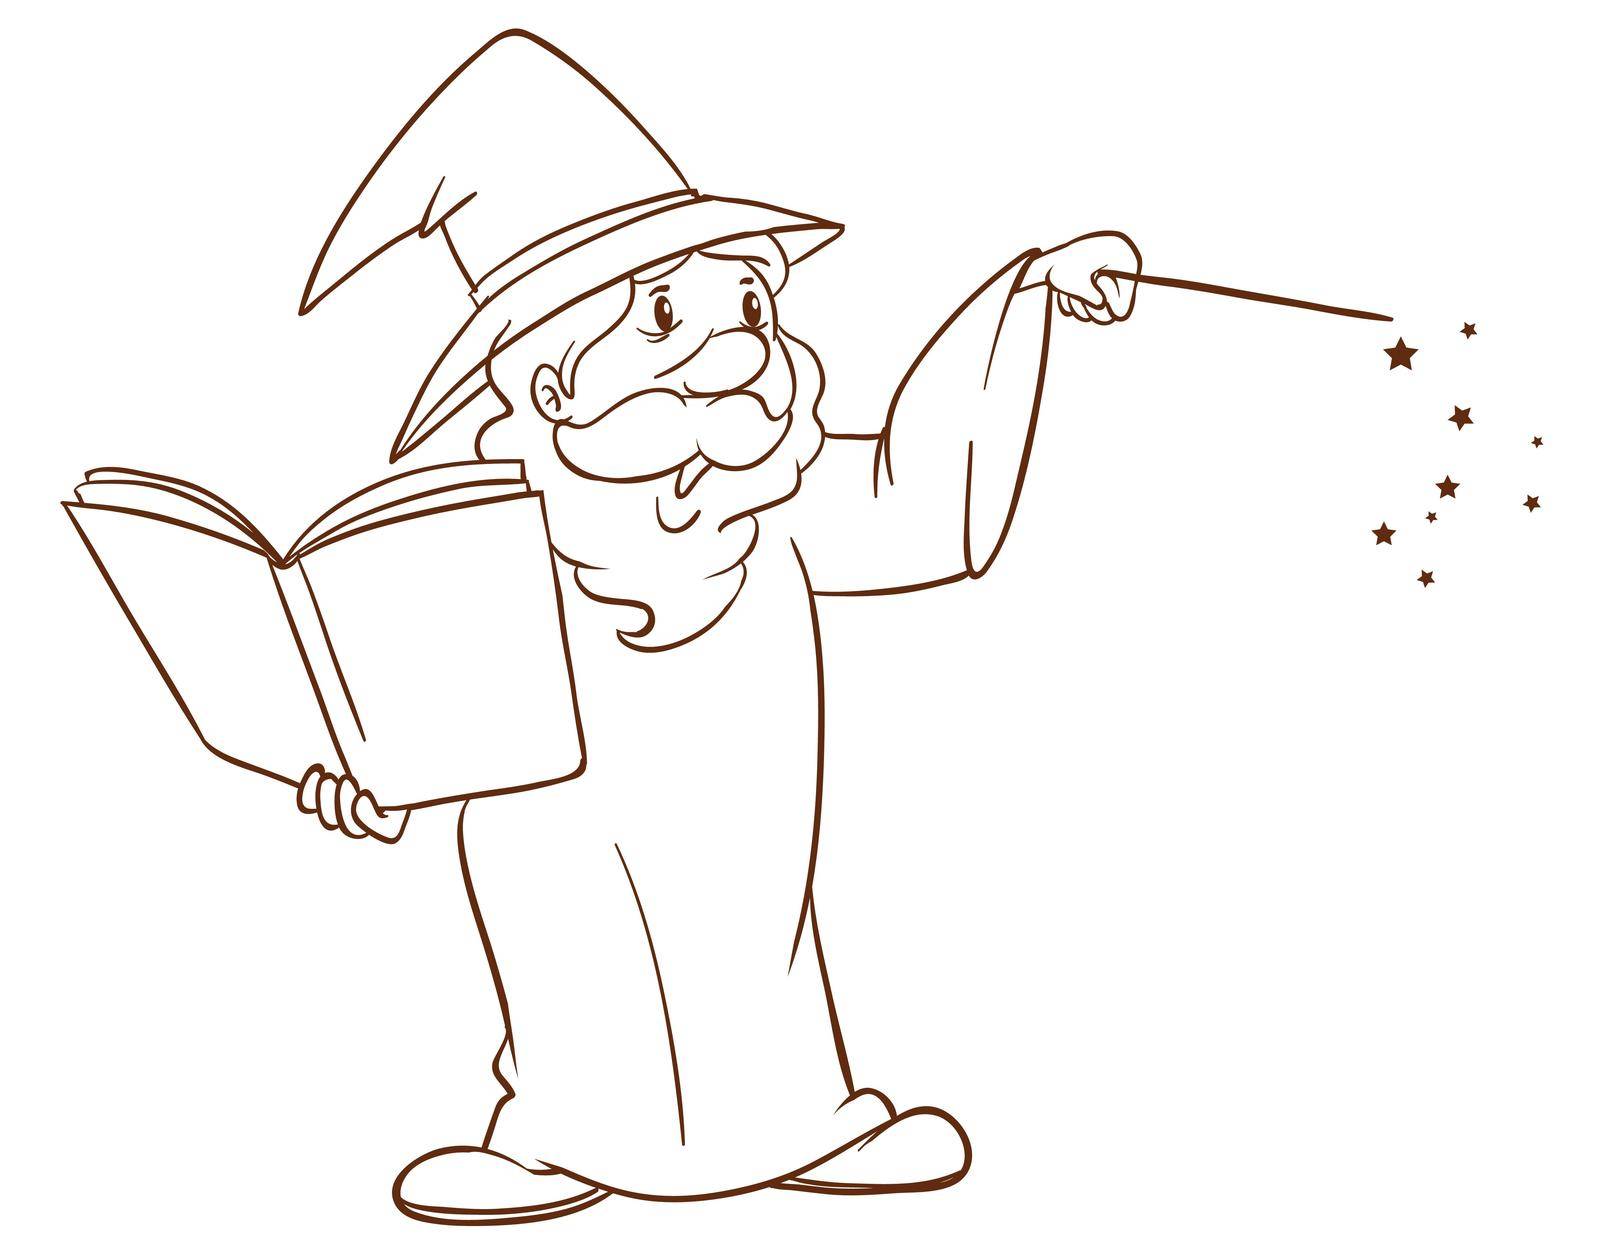 A simple sketch of a wizard by iimages